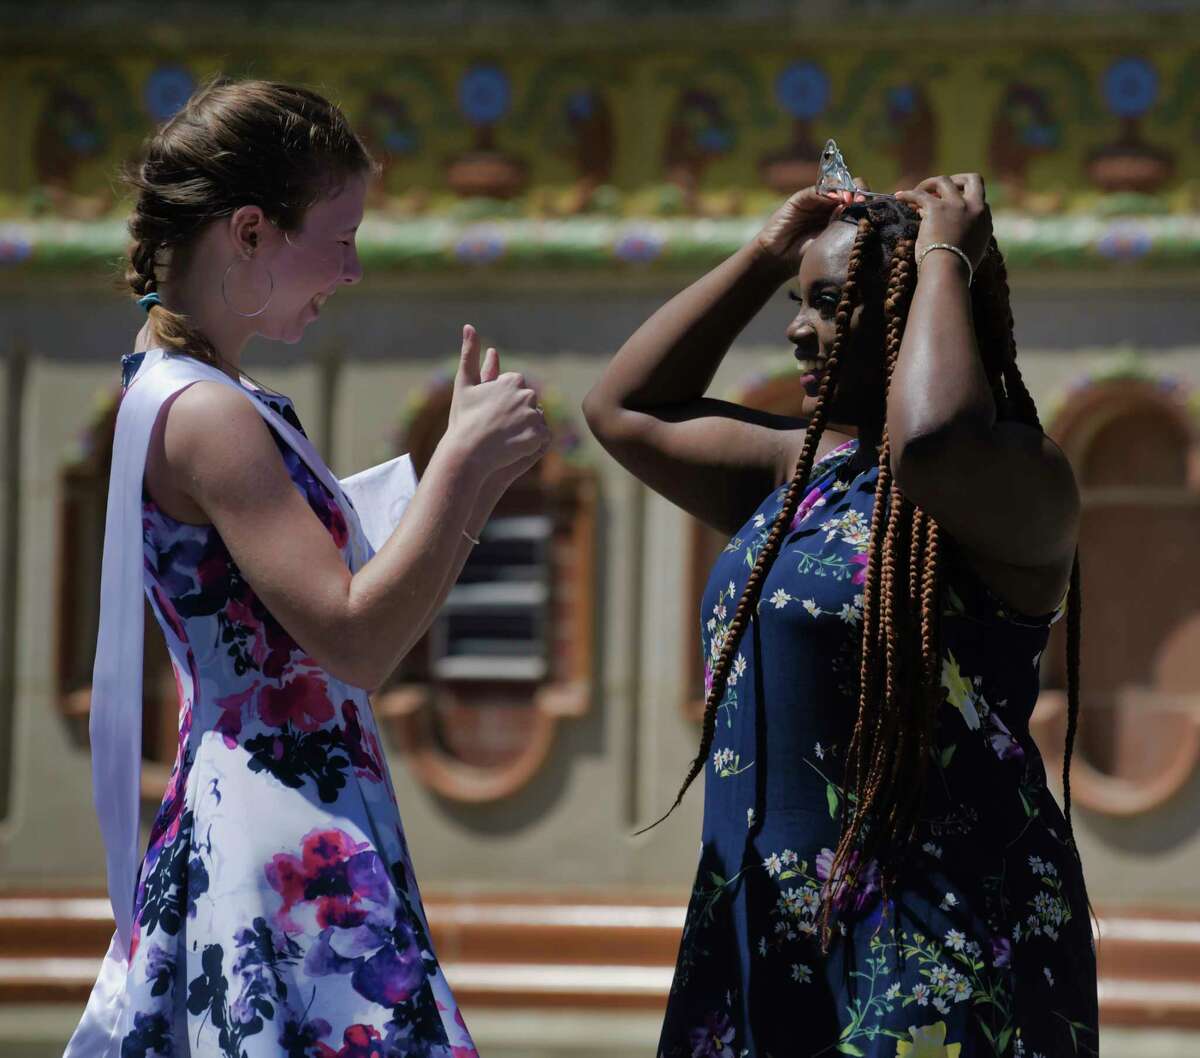 The 2020 Tulip Queen, Kaya Rifenberg-Stempel, left, celebrates with the 2021 Tulip Queen, Ashanti Bishop, after handing over her crown to Bishop during an event at Washington Park on Sunday, June 13, 2021, in Albany, N.Y. The 2022 crowning will take place in Washington Park on May 7 at noon. (Paul Buckowski/Times Union)